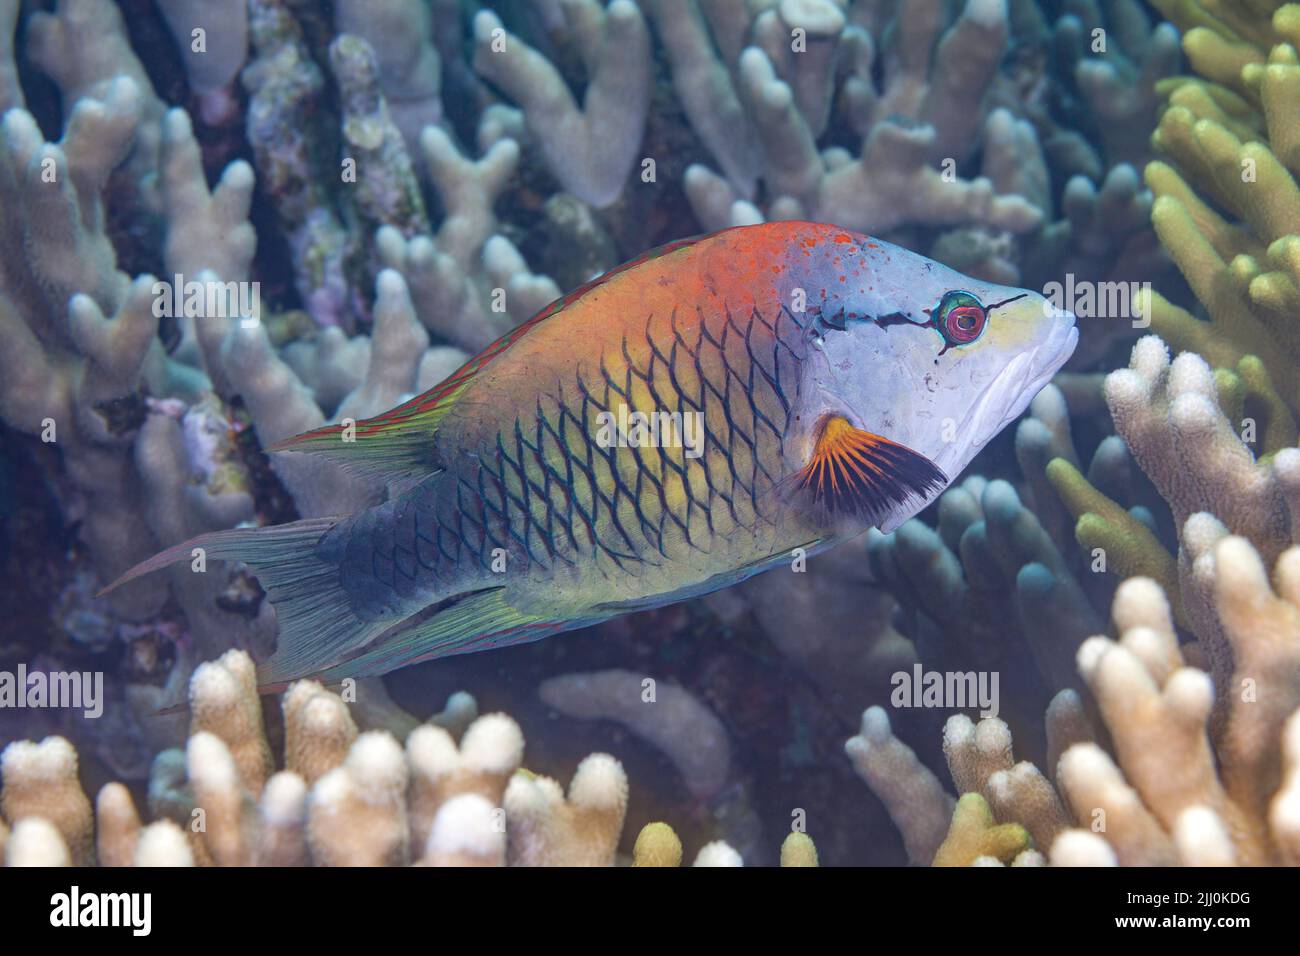 This is the terminal male phase of the slingjaw wrasse, Epibulus insidiator, Yap, Micronesia. The slingjaw wrasse gets its name from its highly protru Stock Photo